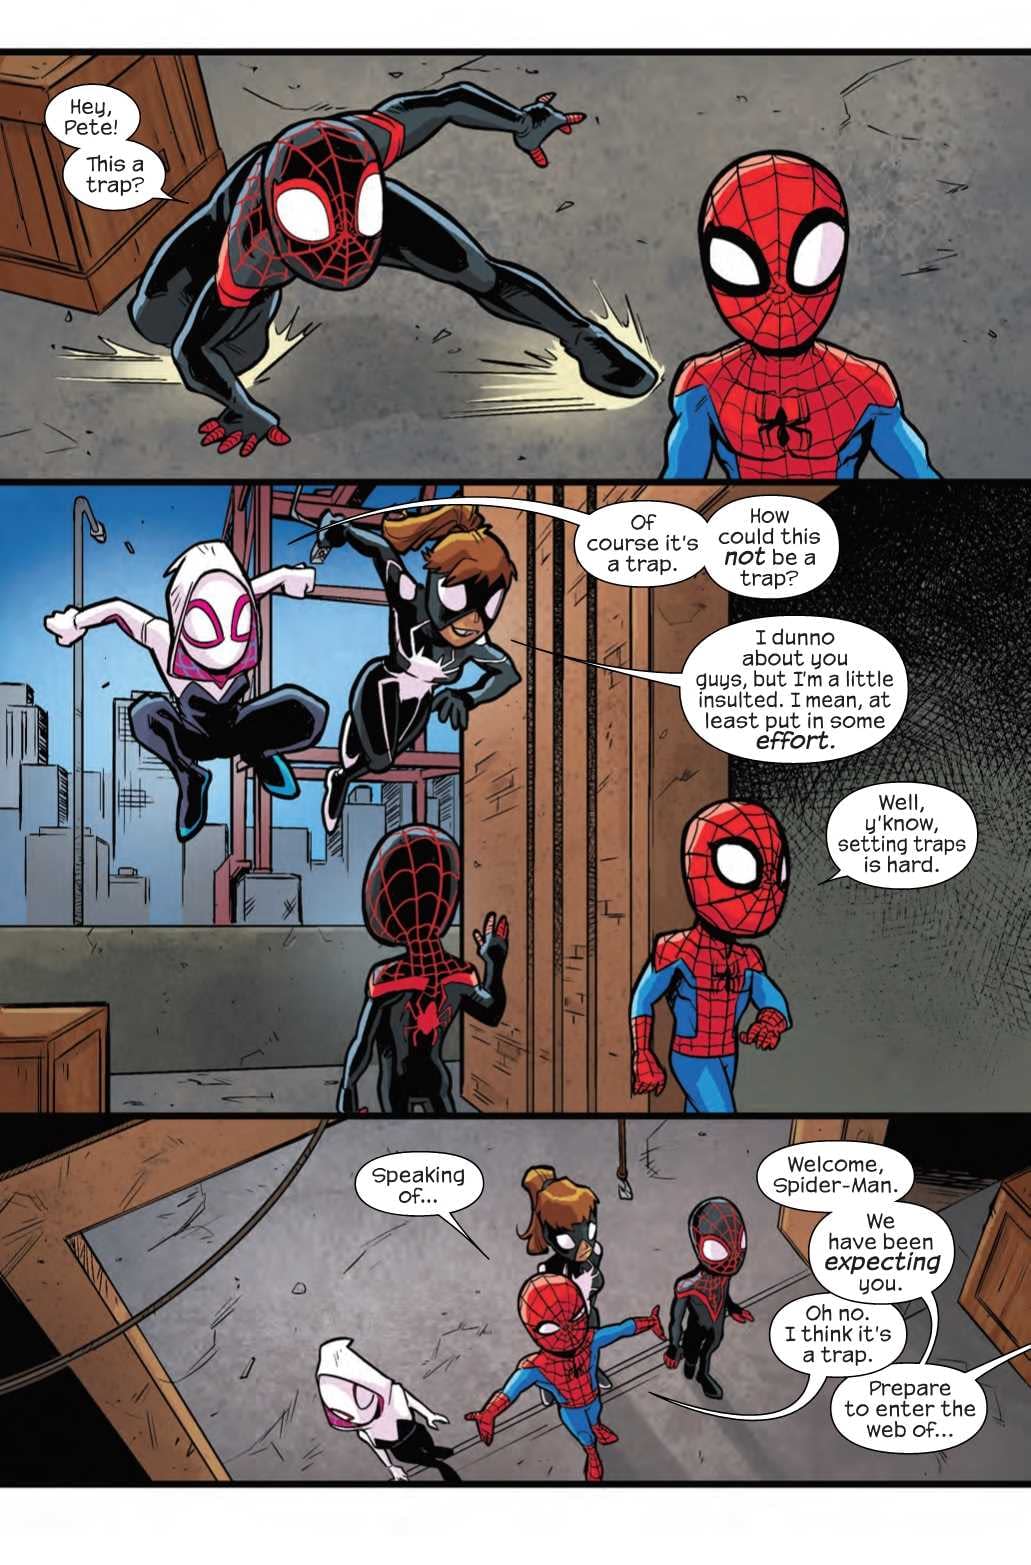 The Return of the Funny Pages in  Next Week's MSA Spider-Man Web of Intrigue #1